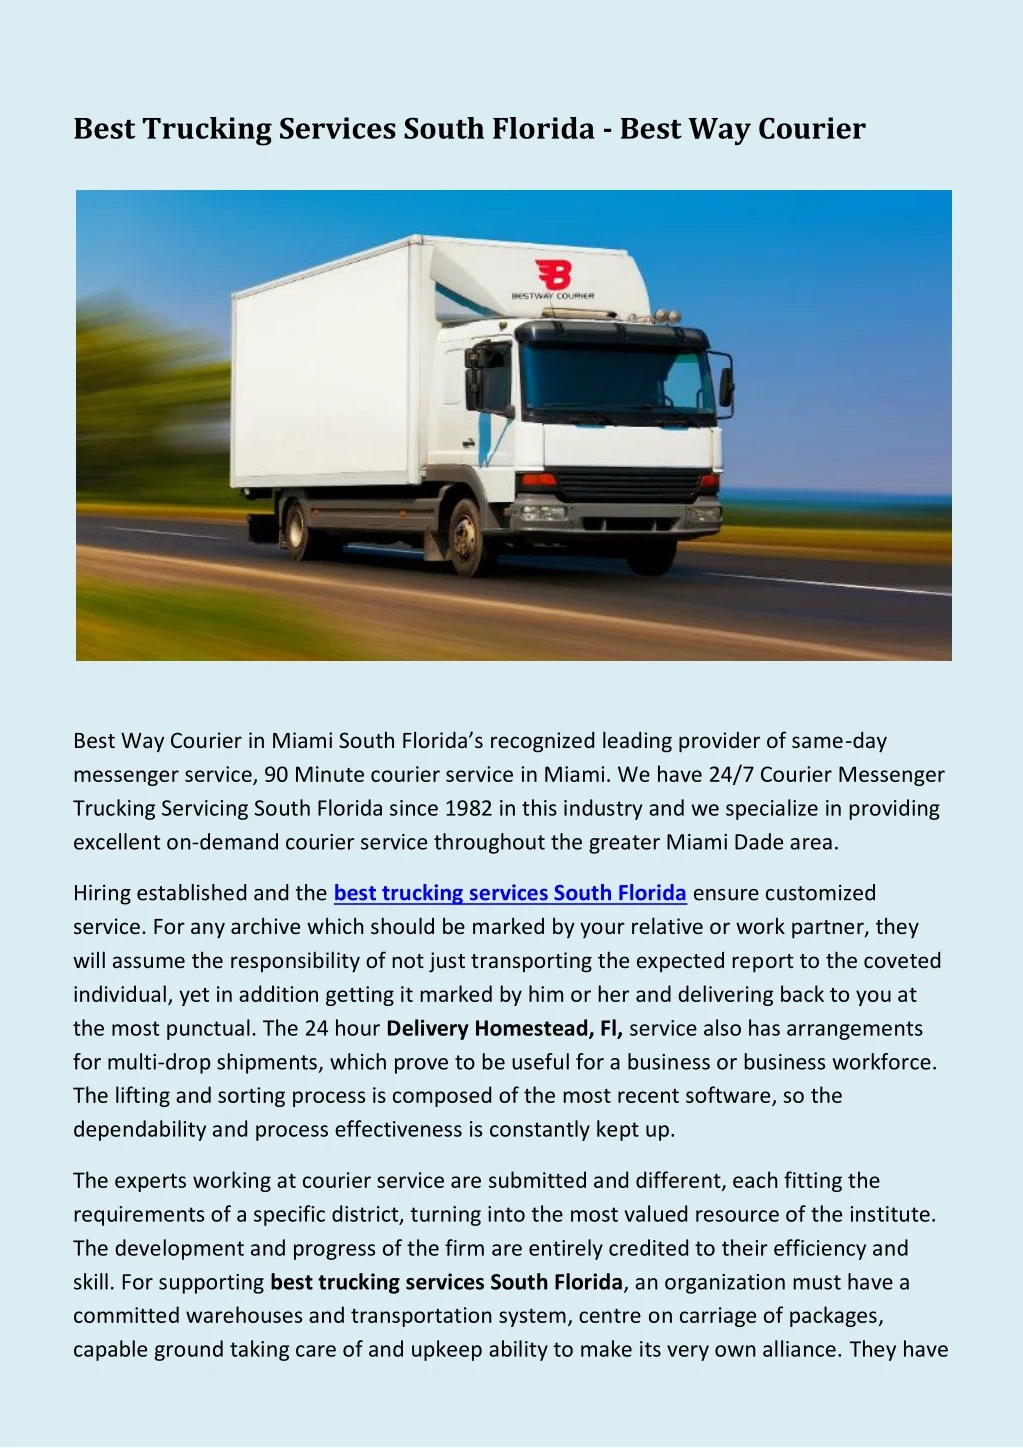 best trucking services south florida best